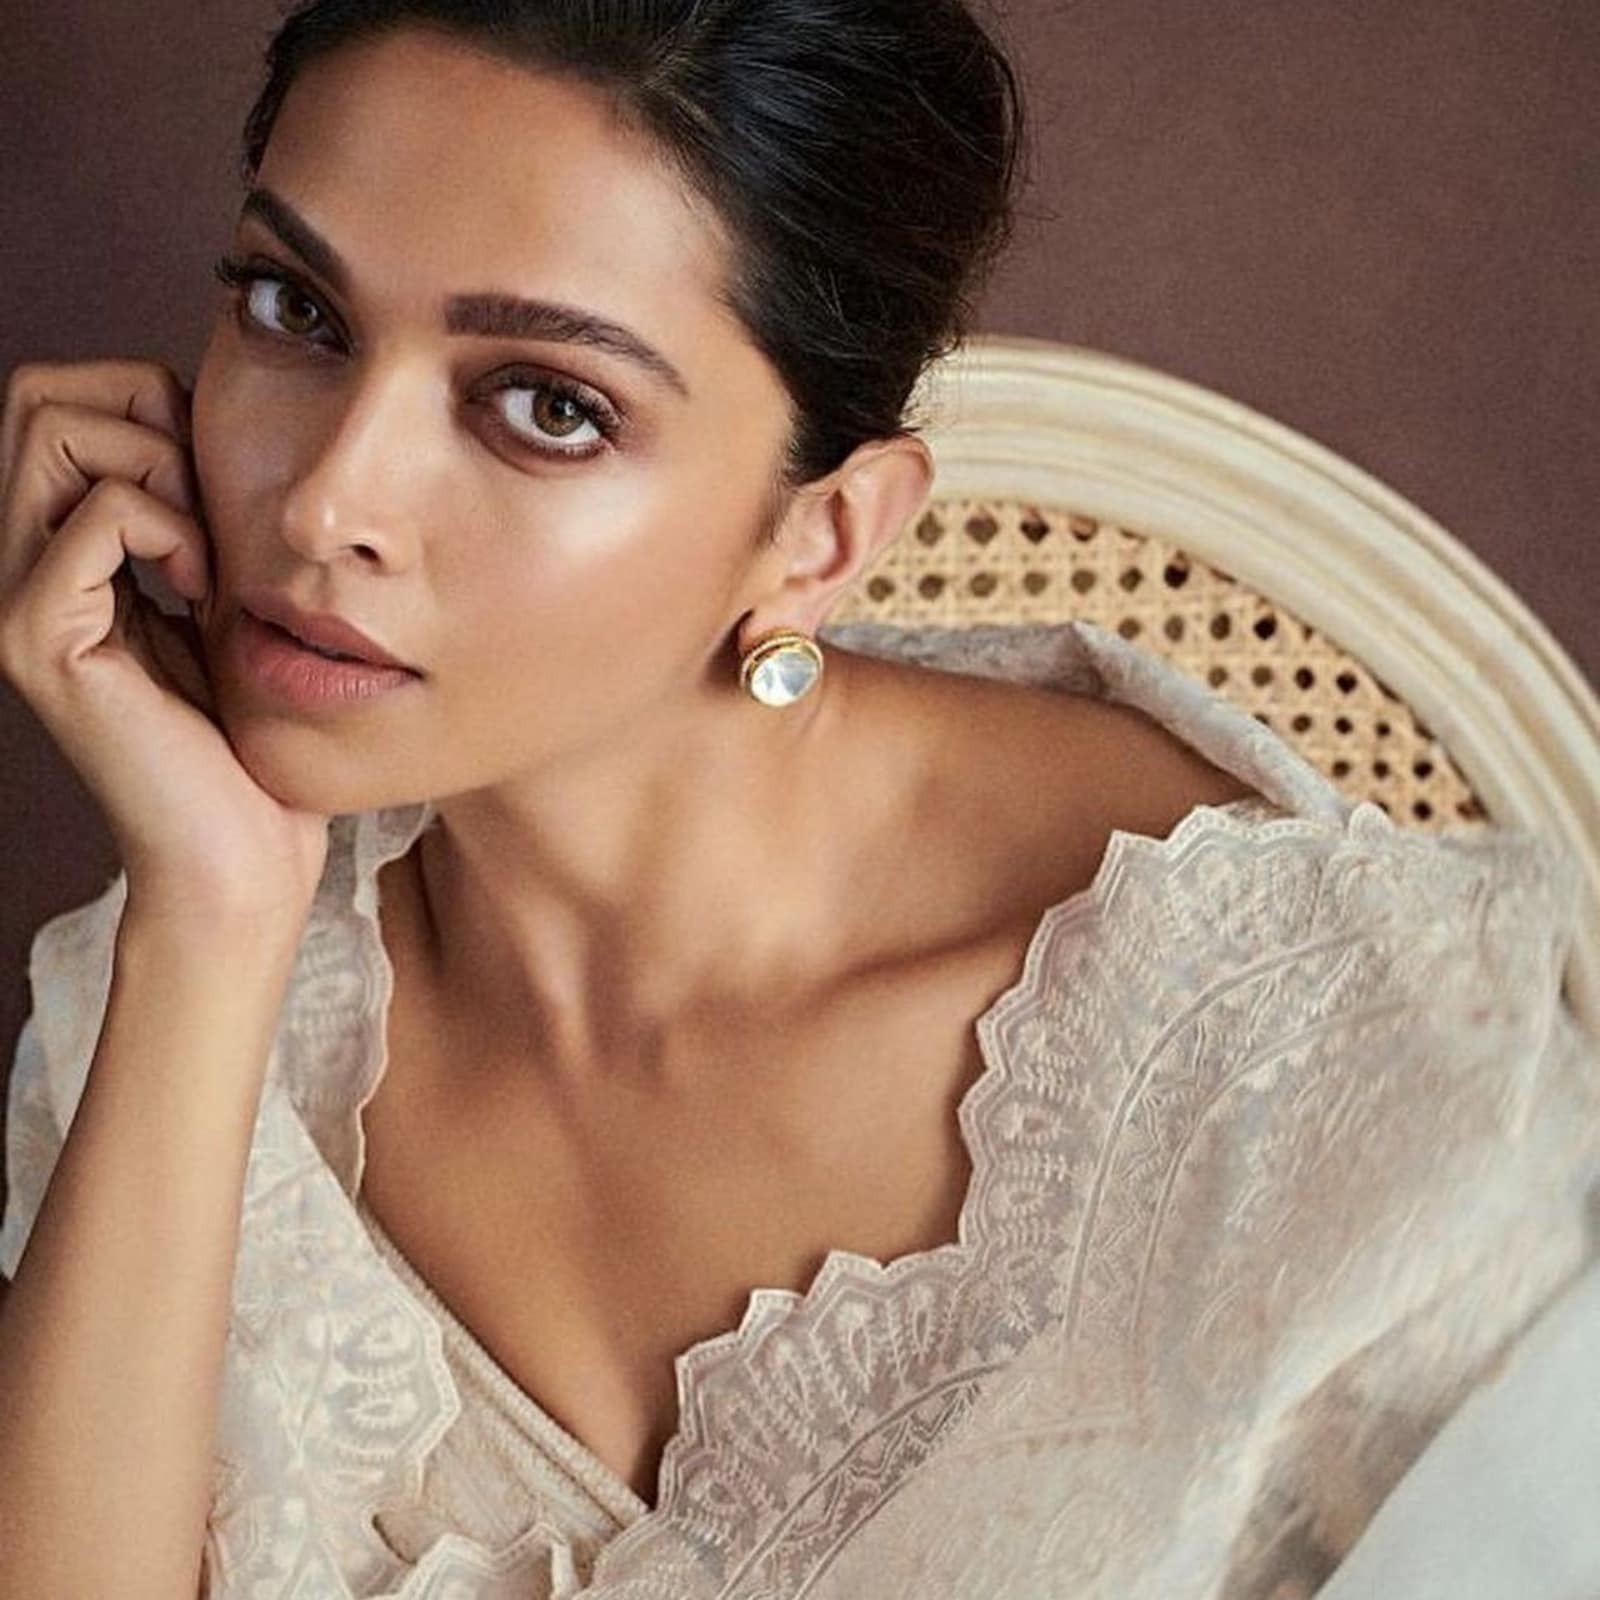 Deepika Padukone to Attend Met Gala 2022 with Louis Vuitton? Here's What We  Know